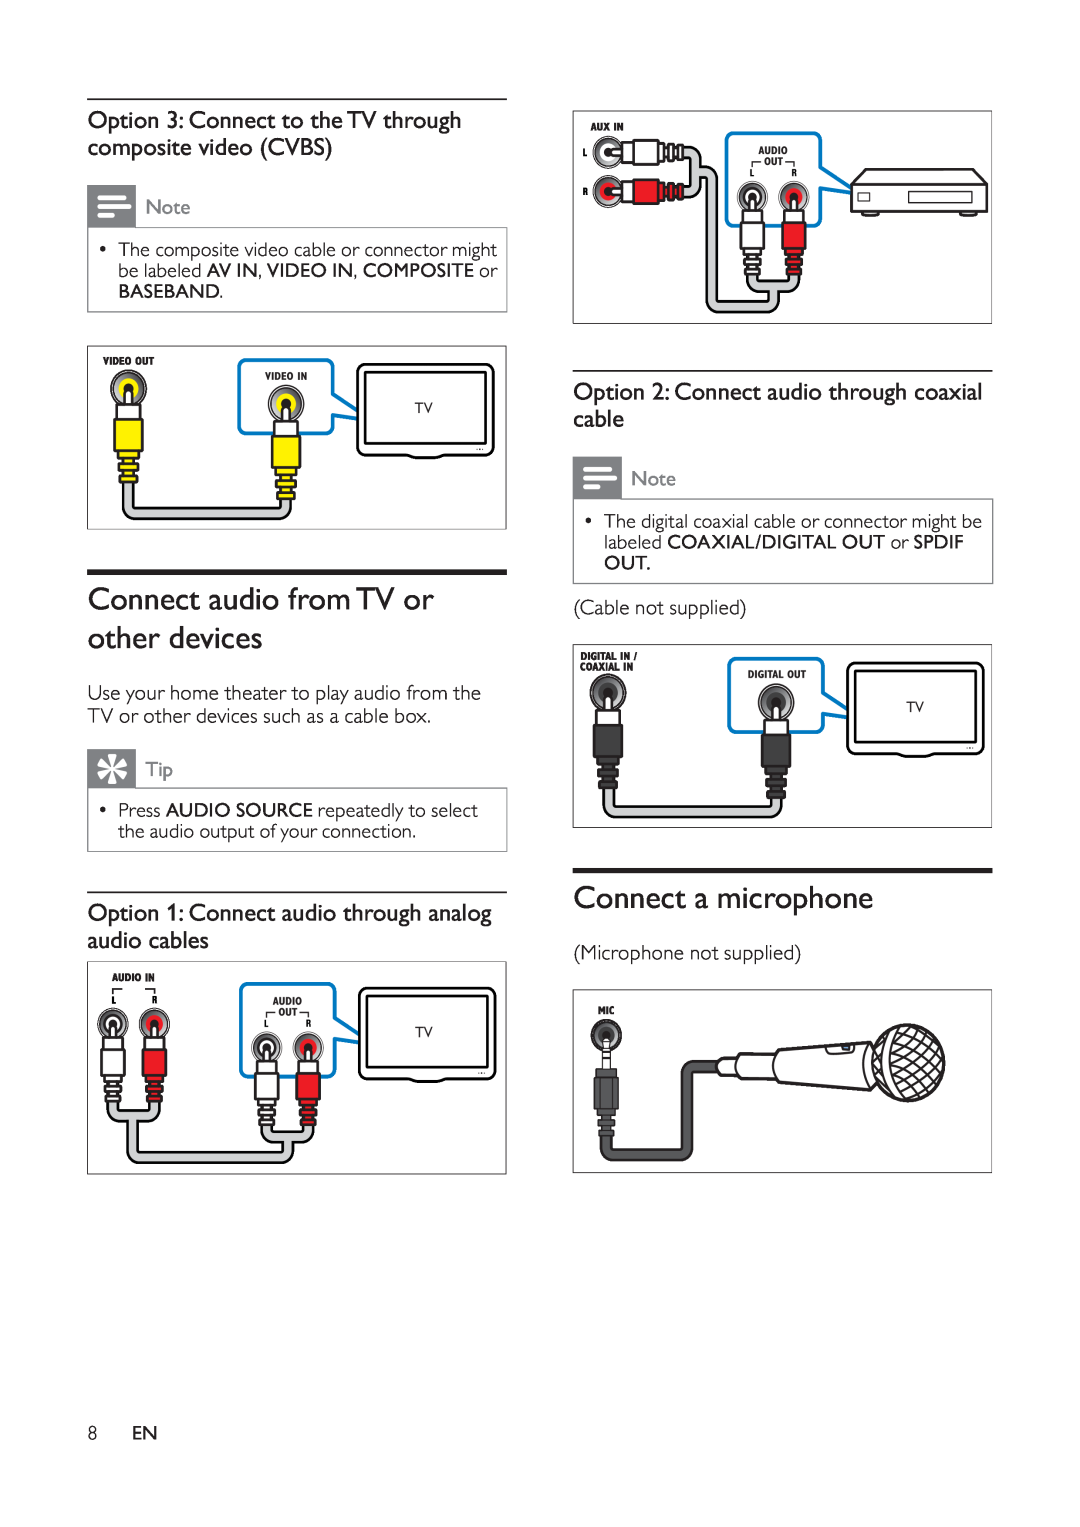 Philips HTS5530 Connect audio fromTV or other devices, Connect a microphone, Option 2 Connect audio through coaxial cable 